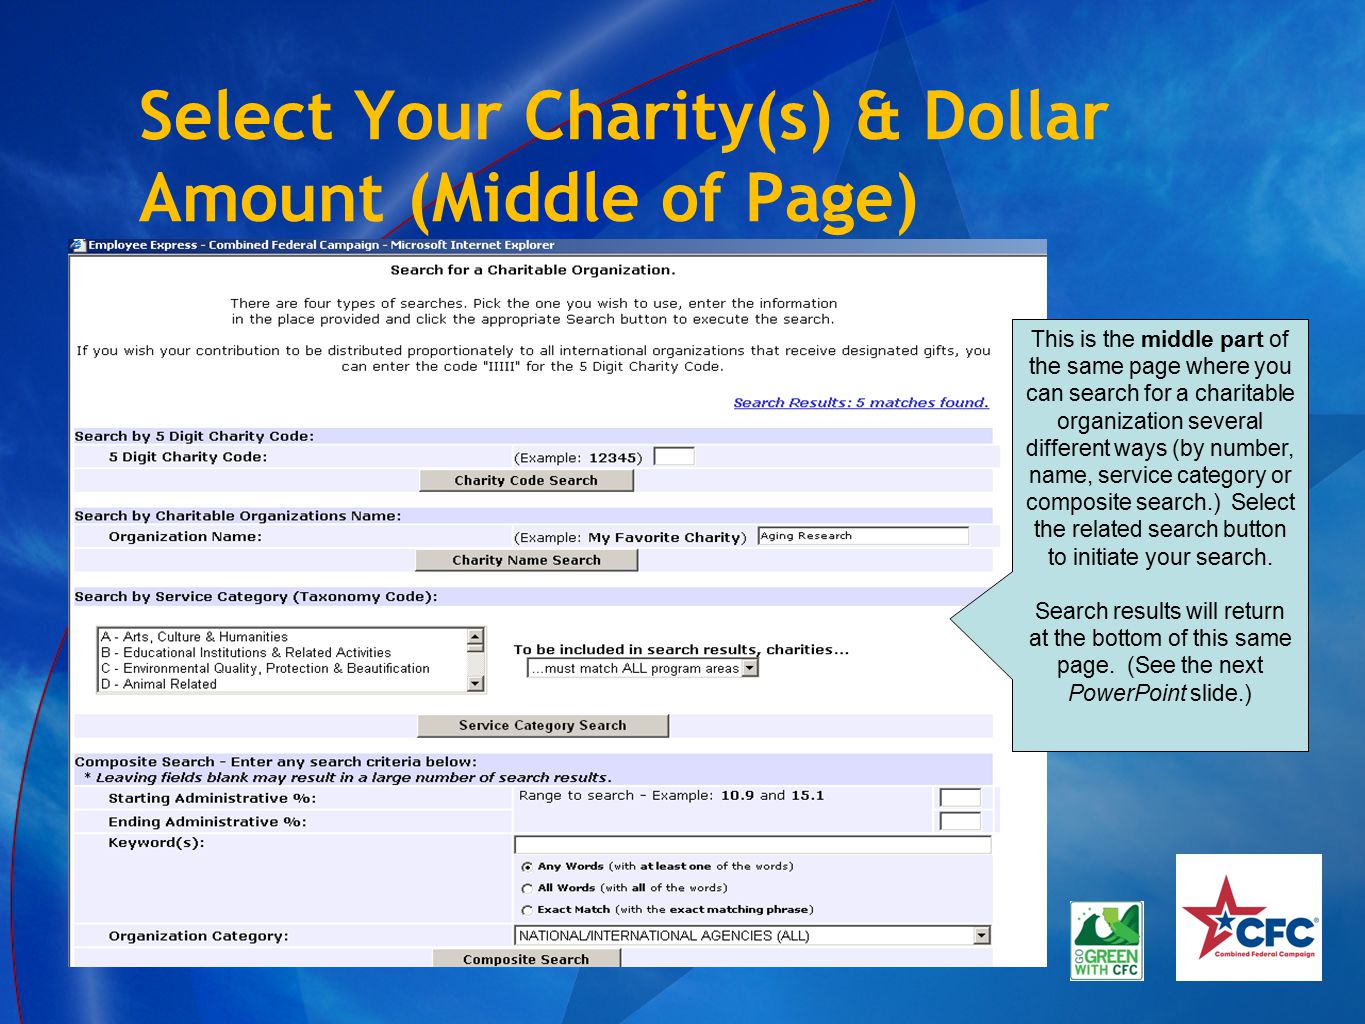 Select Your Charity(s) & Dollar Amount (Middle of Page) This is the middle part of the same page where you can search for a charitable organization several different ways (by number, name, service category or composite search.) Select the related search button to initiate your search.